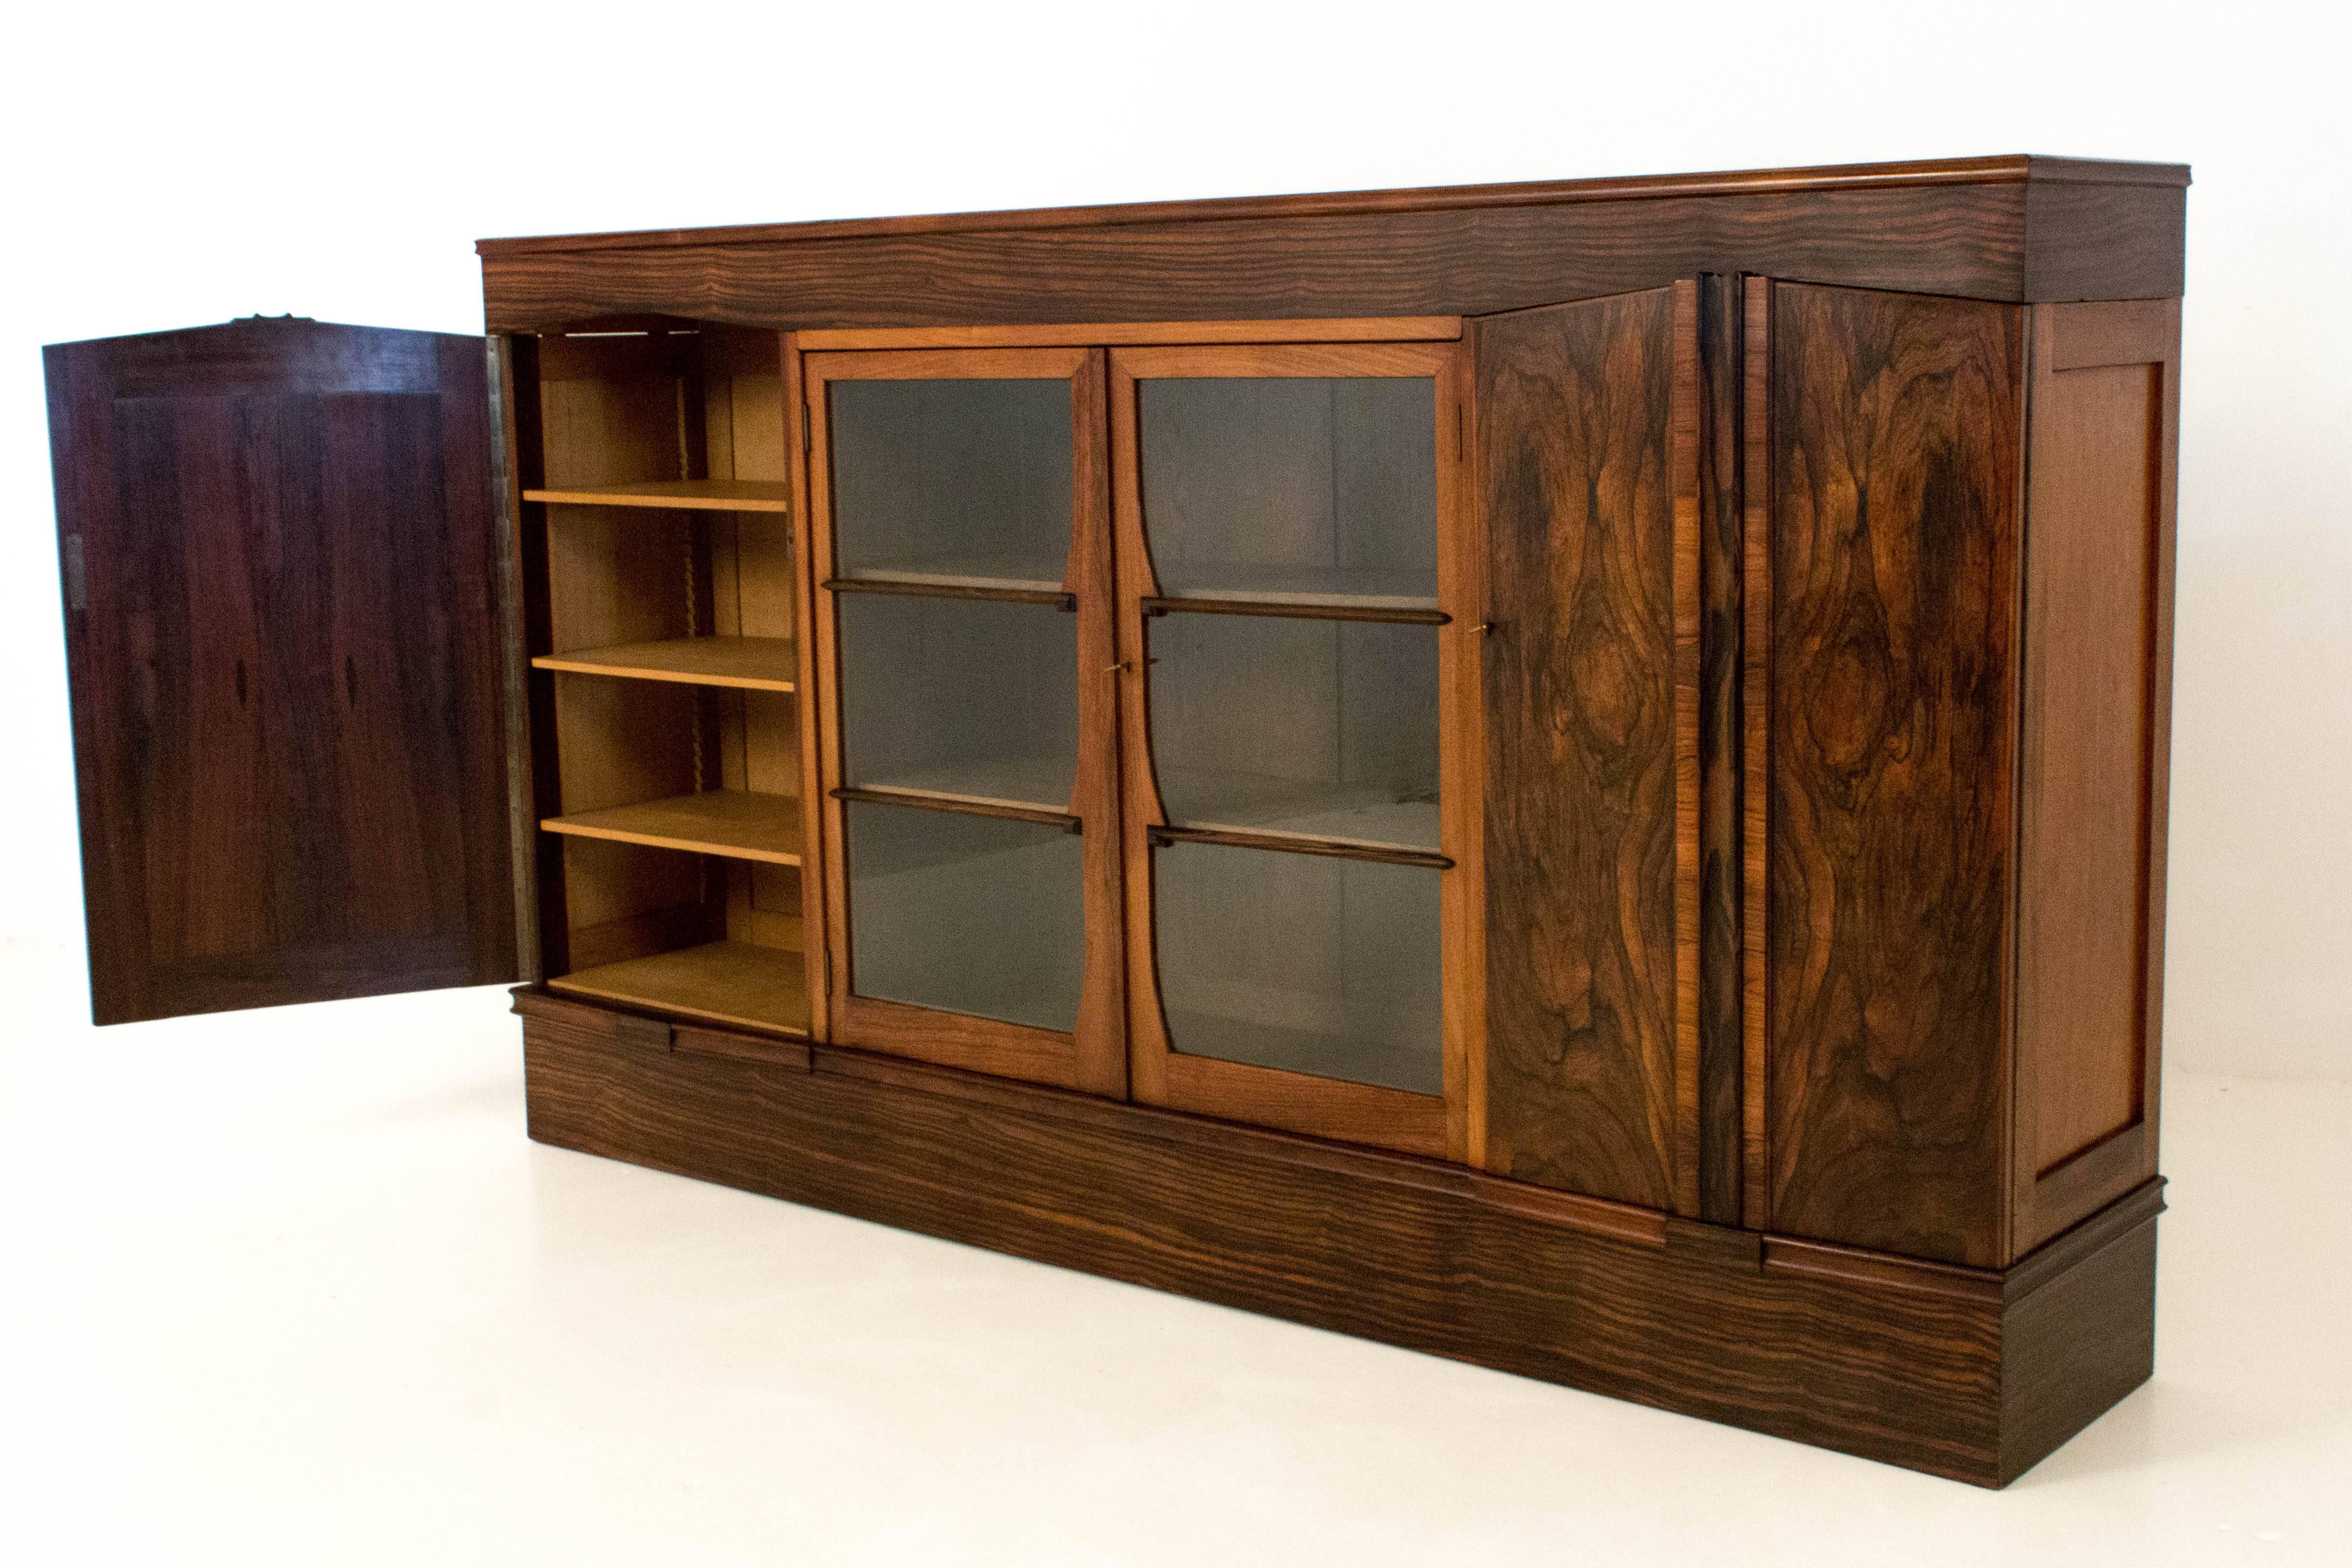 Rare and large Art Deco Amsterdam School bookcase by Max Coini Amsterdam.
Rosewood with Macassar ebony.
Eight original solid oak adjustable shelves.
In good original condition with minor wear consistent with age and use,
preserving a beautiful